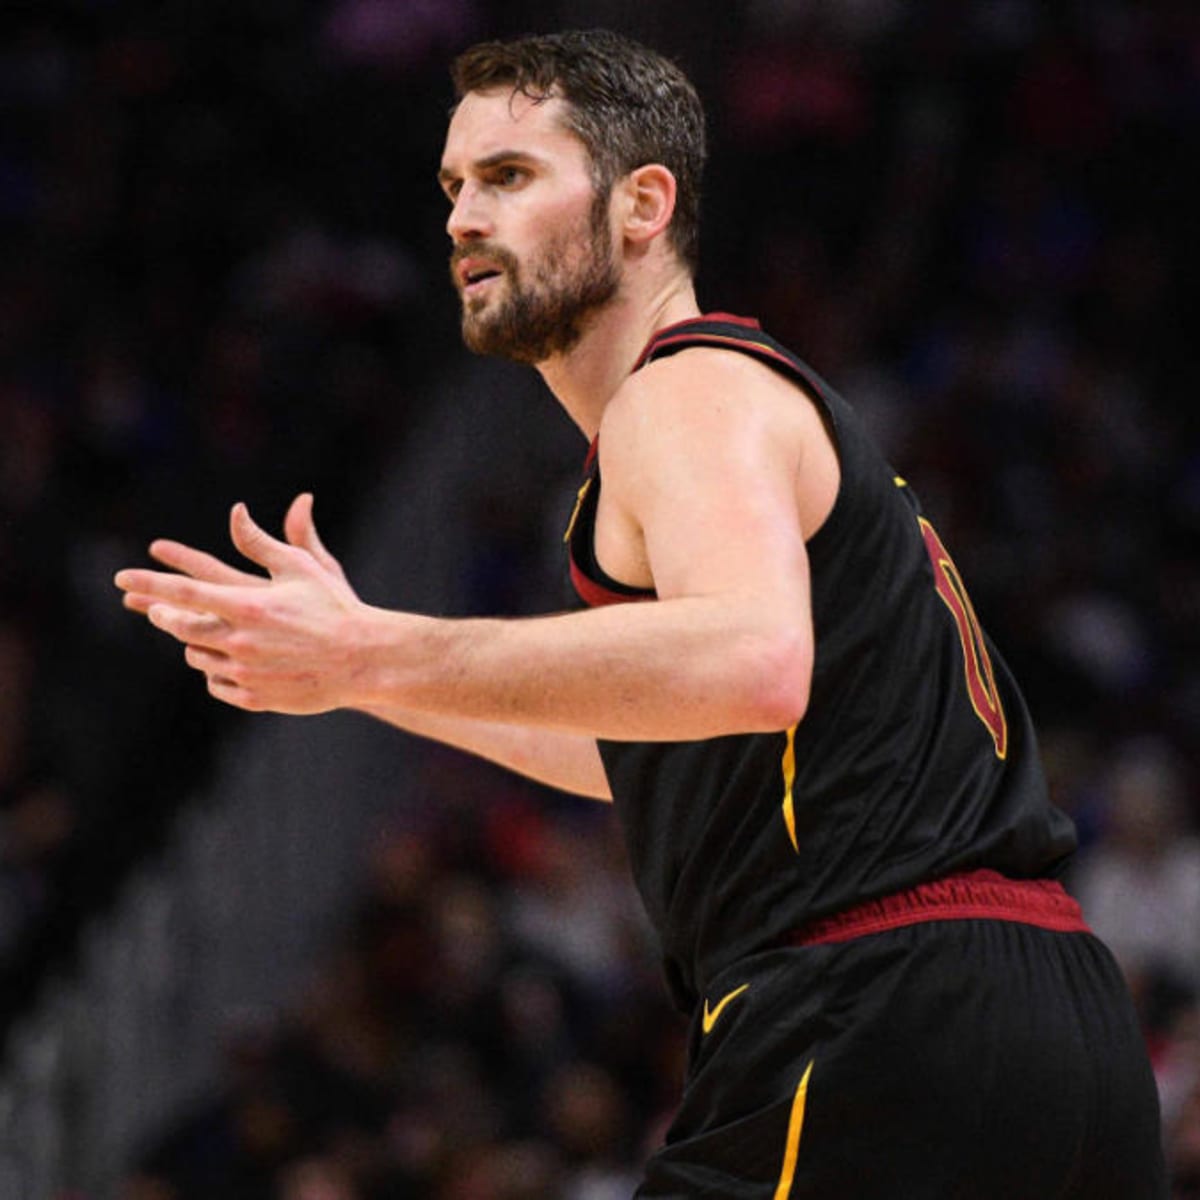 Cavaliers Intend to Retire Kevin Love's No. 0 Jersey in Future After  Contract Buyout, News, Scores, Highlights, Stats, and Rumors